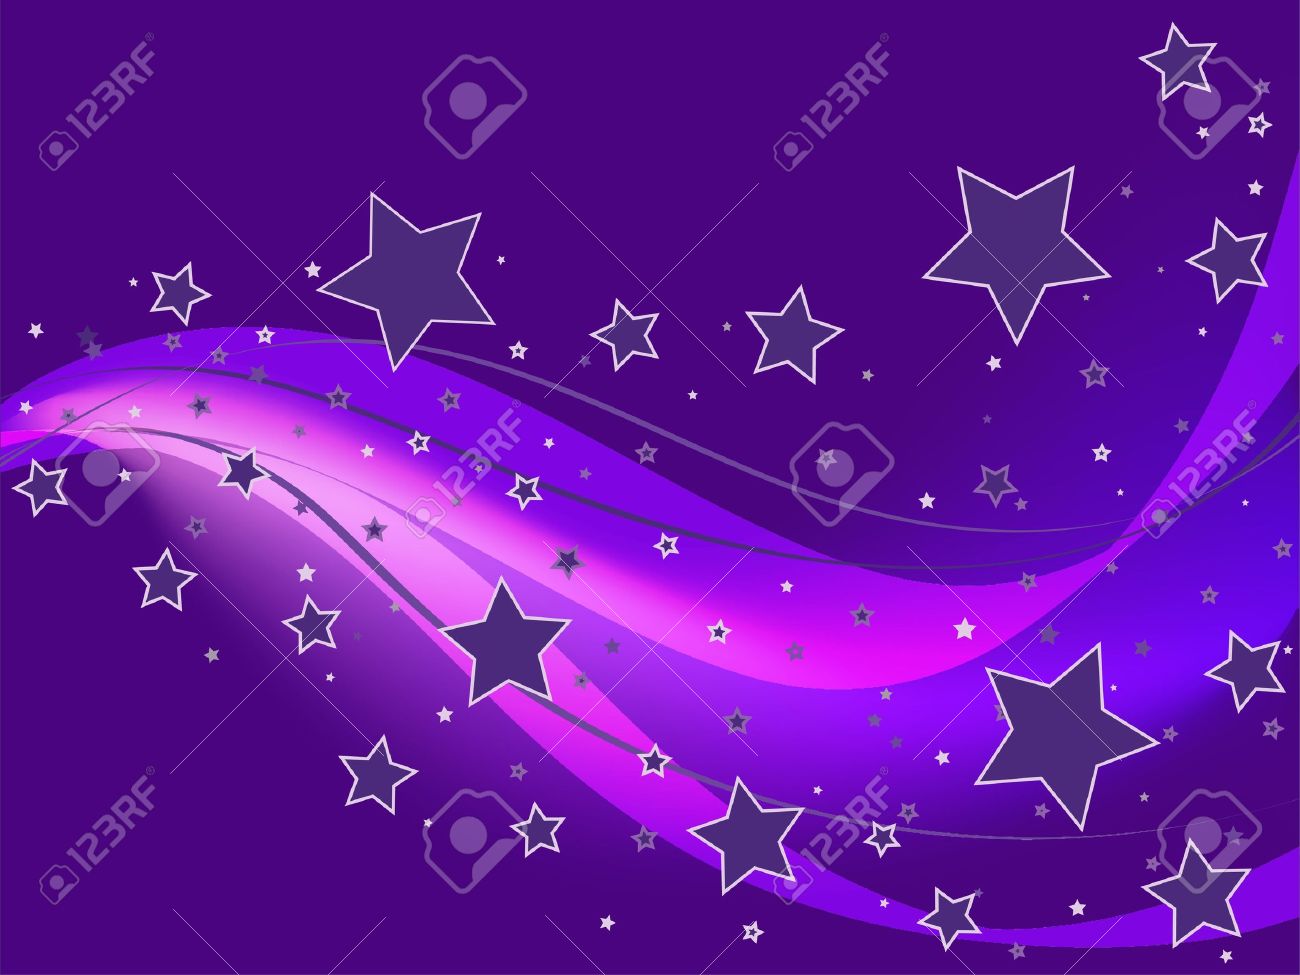 Abstract Organic Wallpaper Or Background With Stars And Ribbons